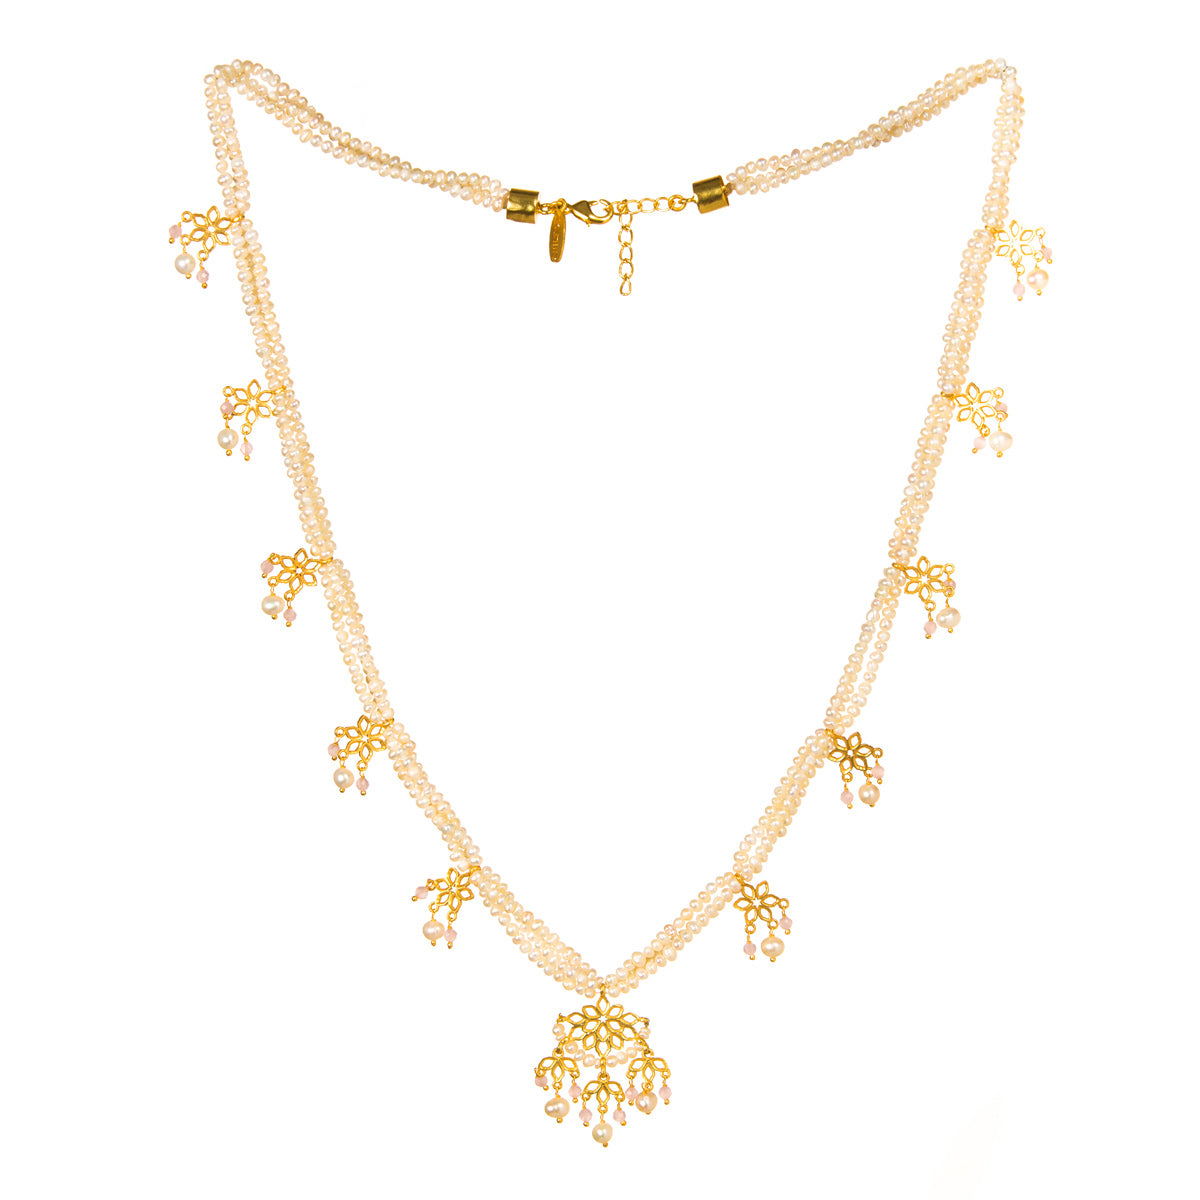 Pristine Pealrs Necklace and Statement Earrings Set